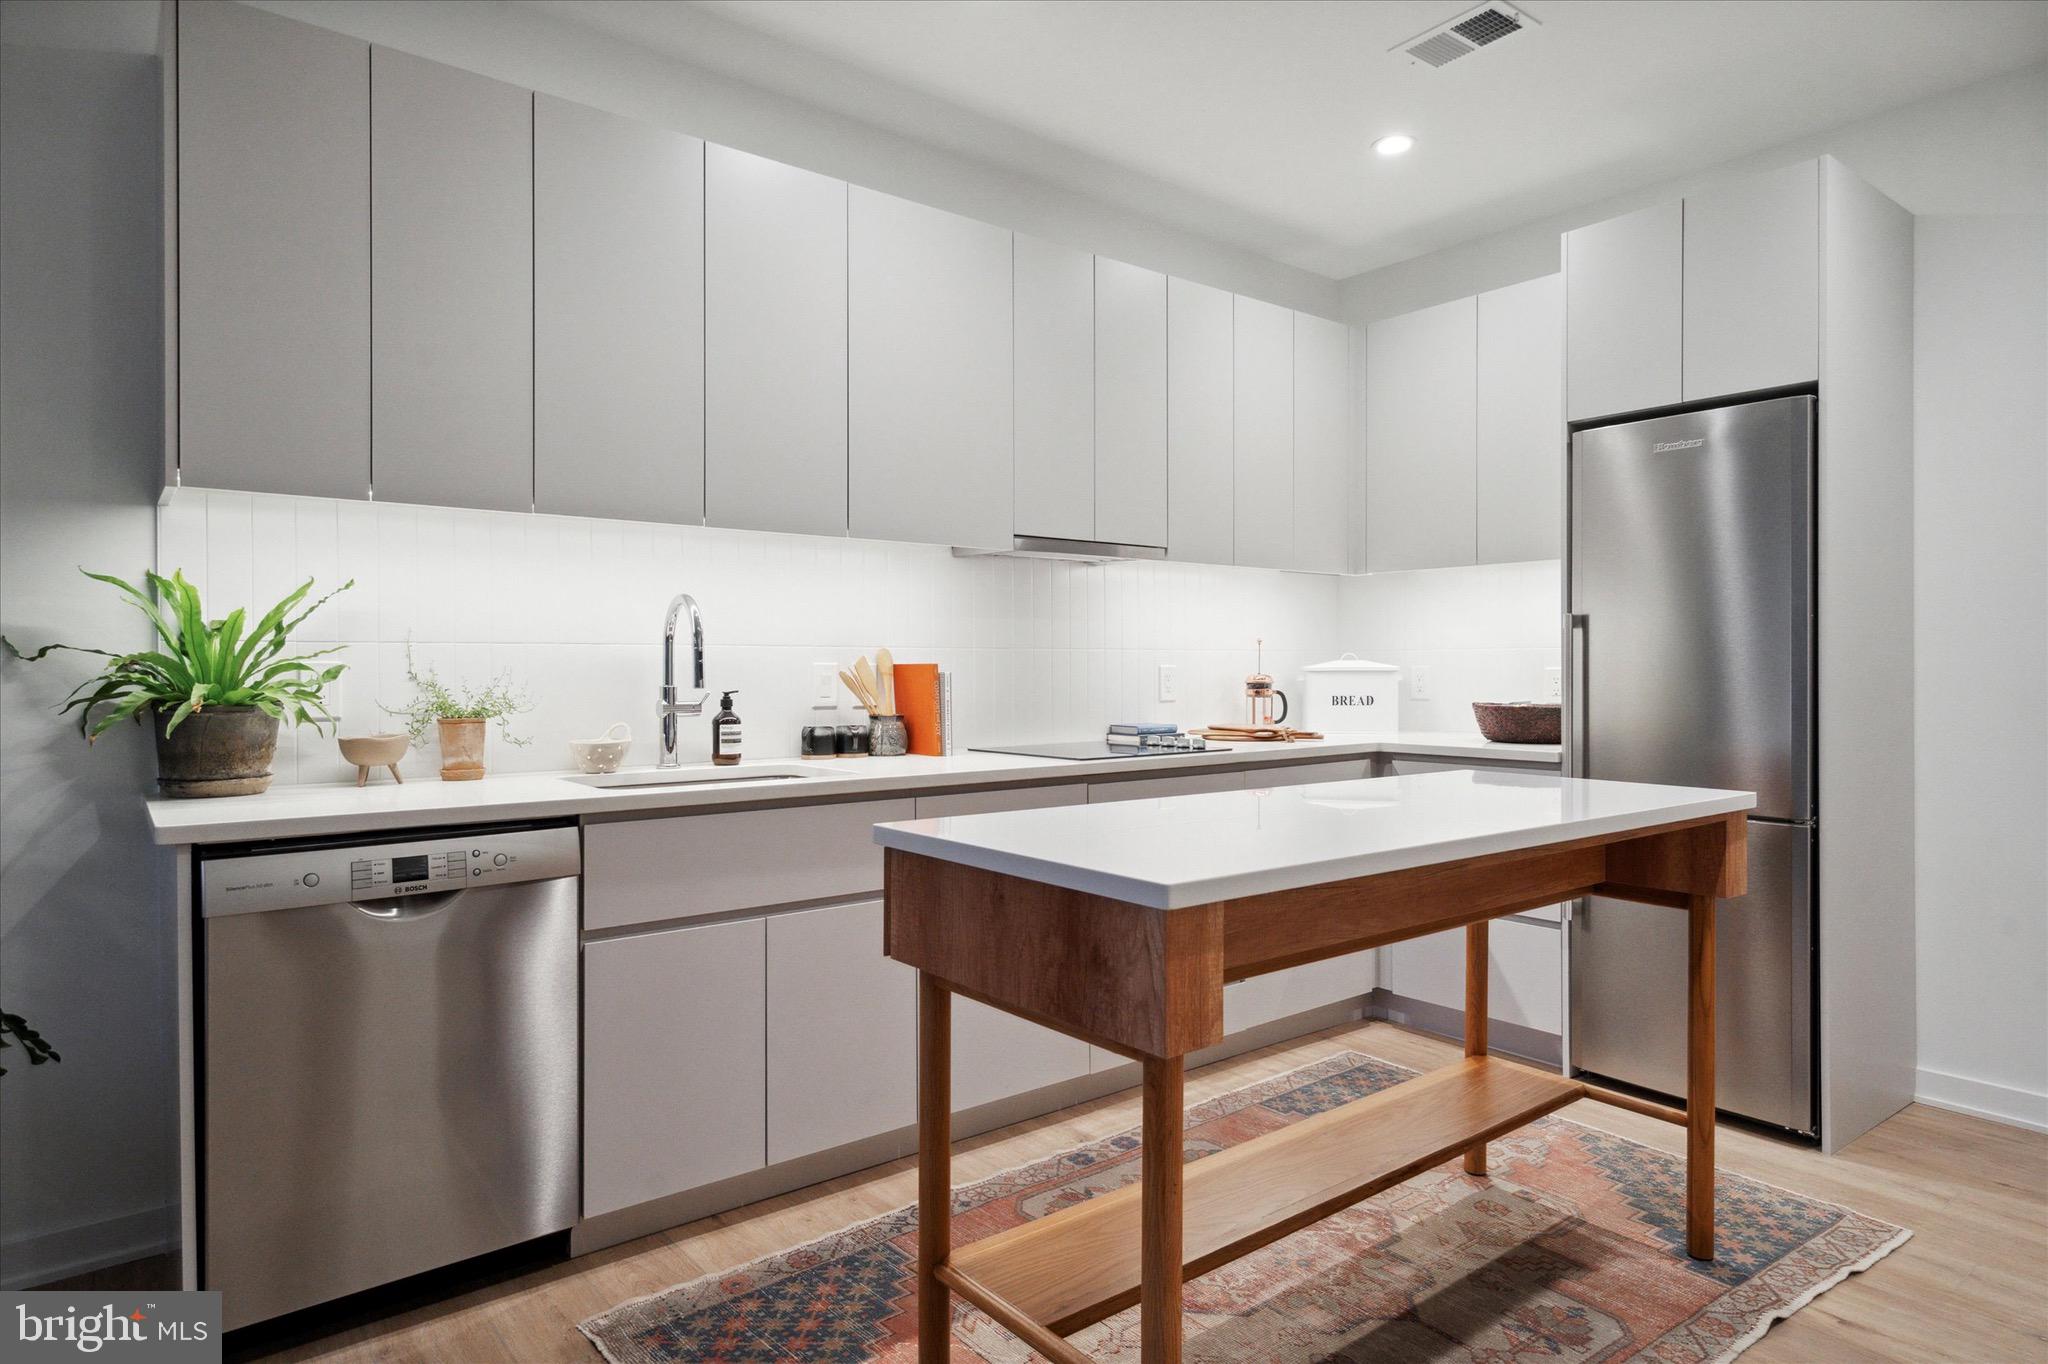 a kitchen with stainless steel appliances a sink a refrigerator and cabinets